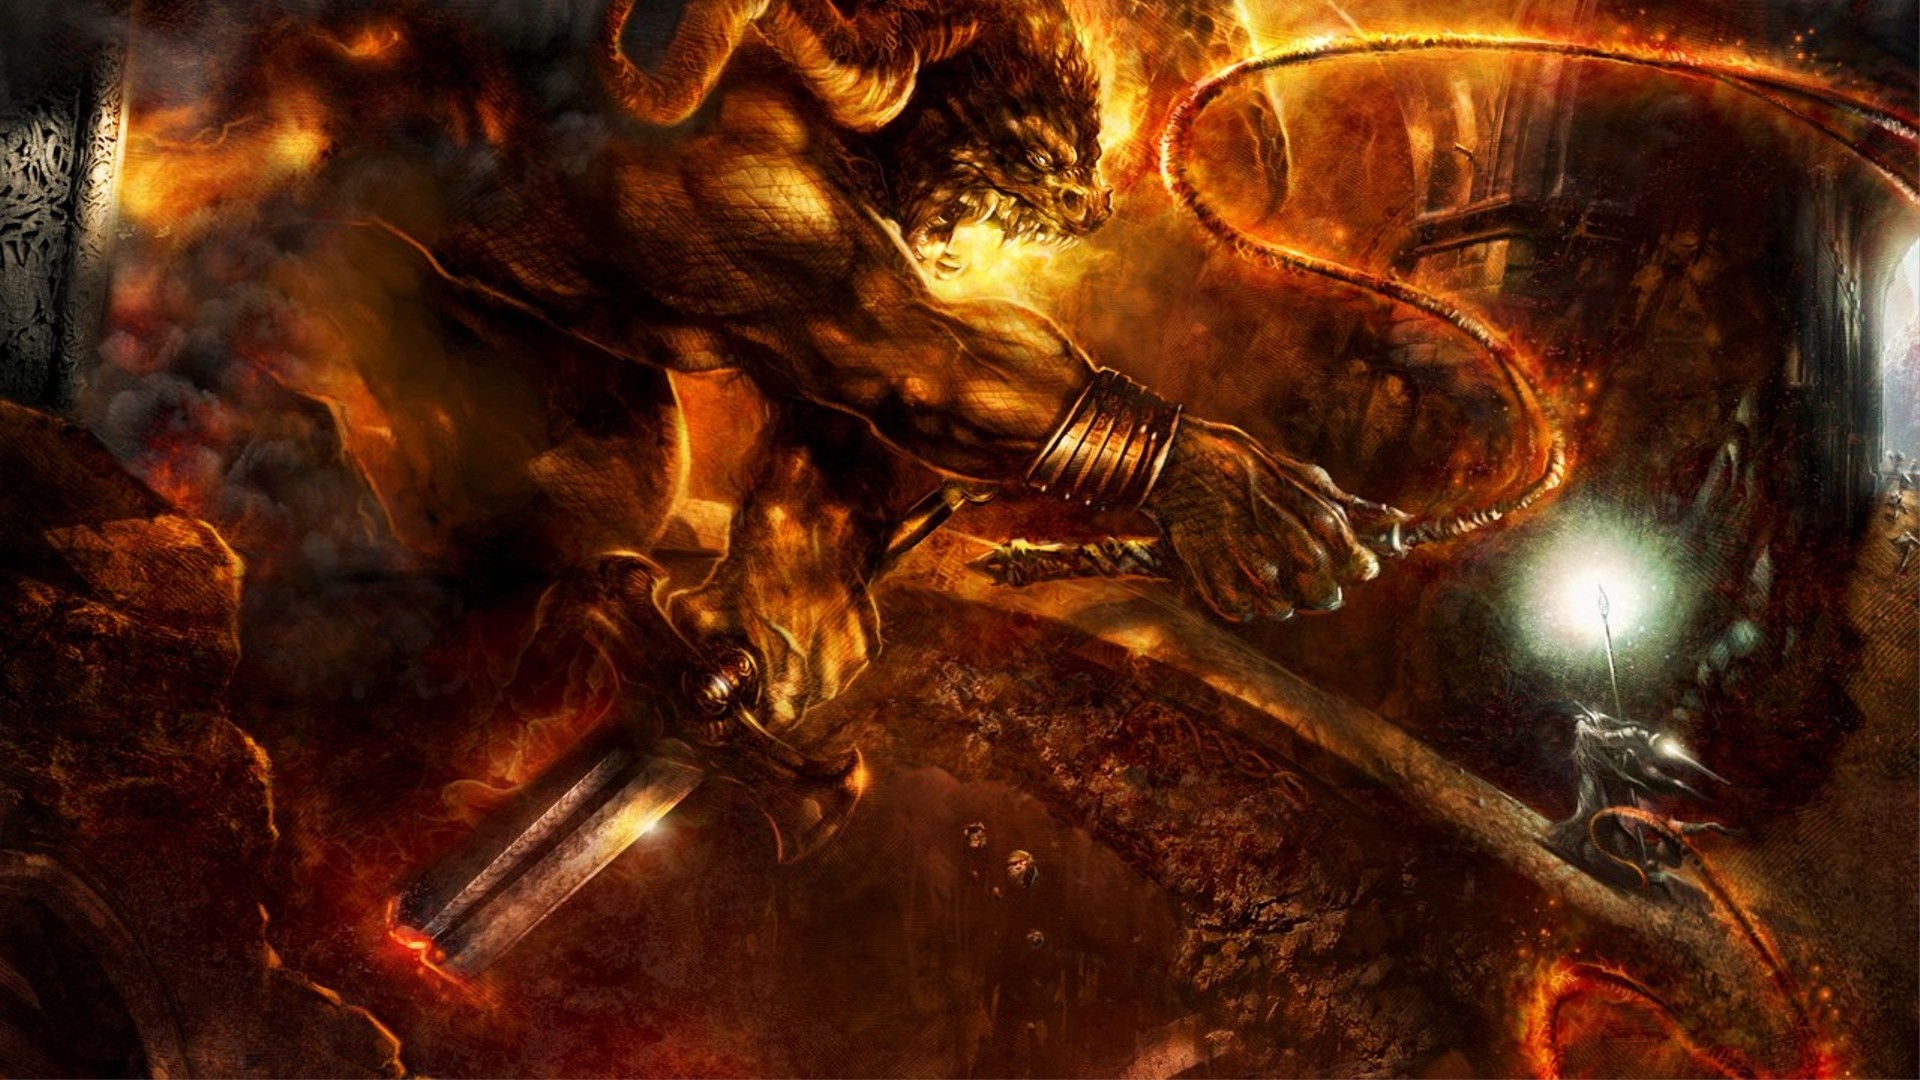 1920x1080 Download Demon Balrog Live Wallpaper for Android - Appszoom